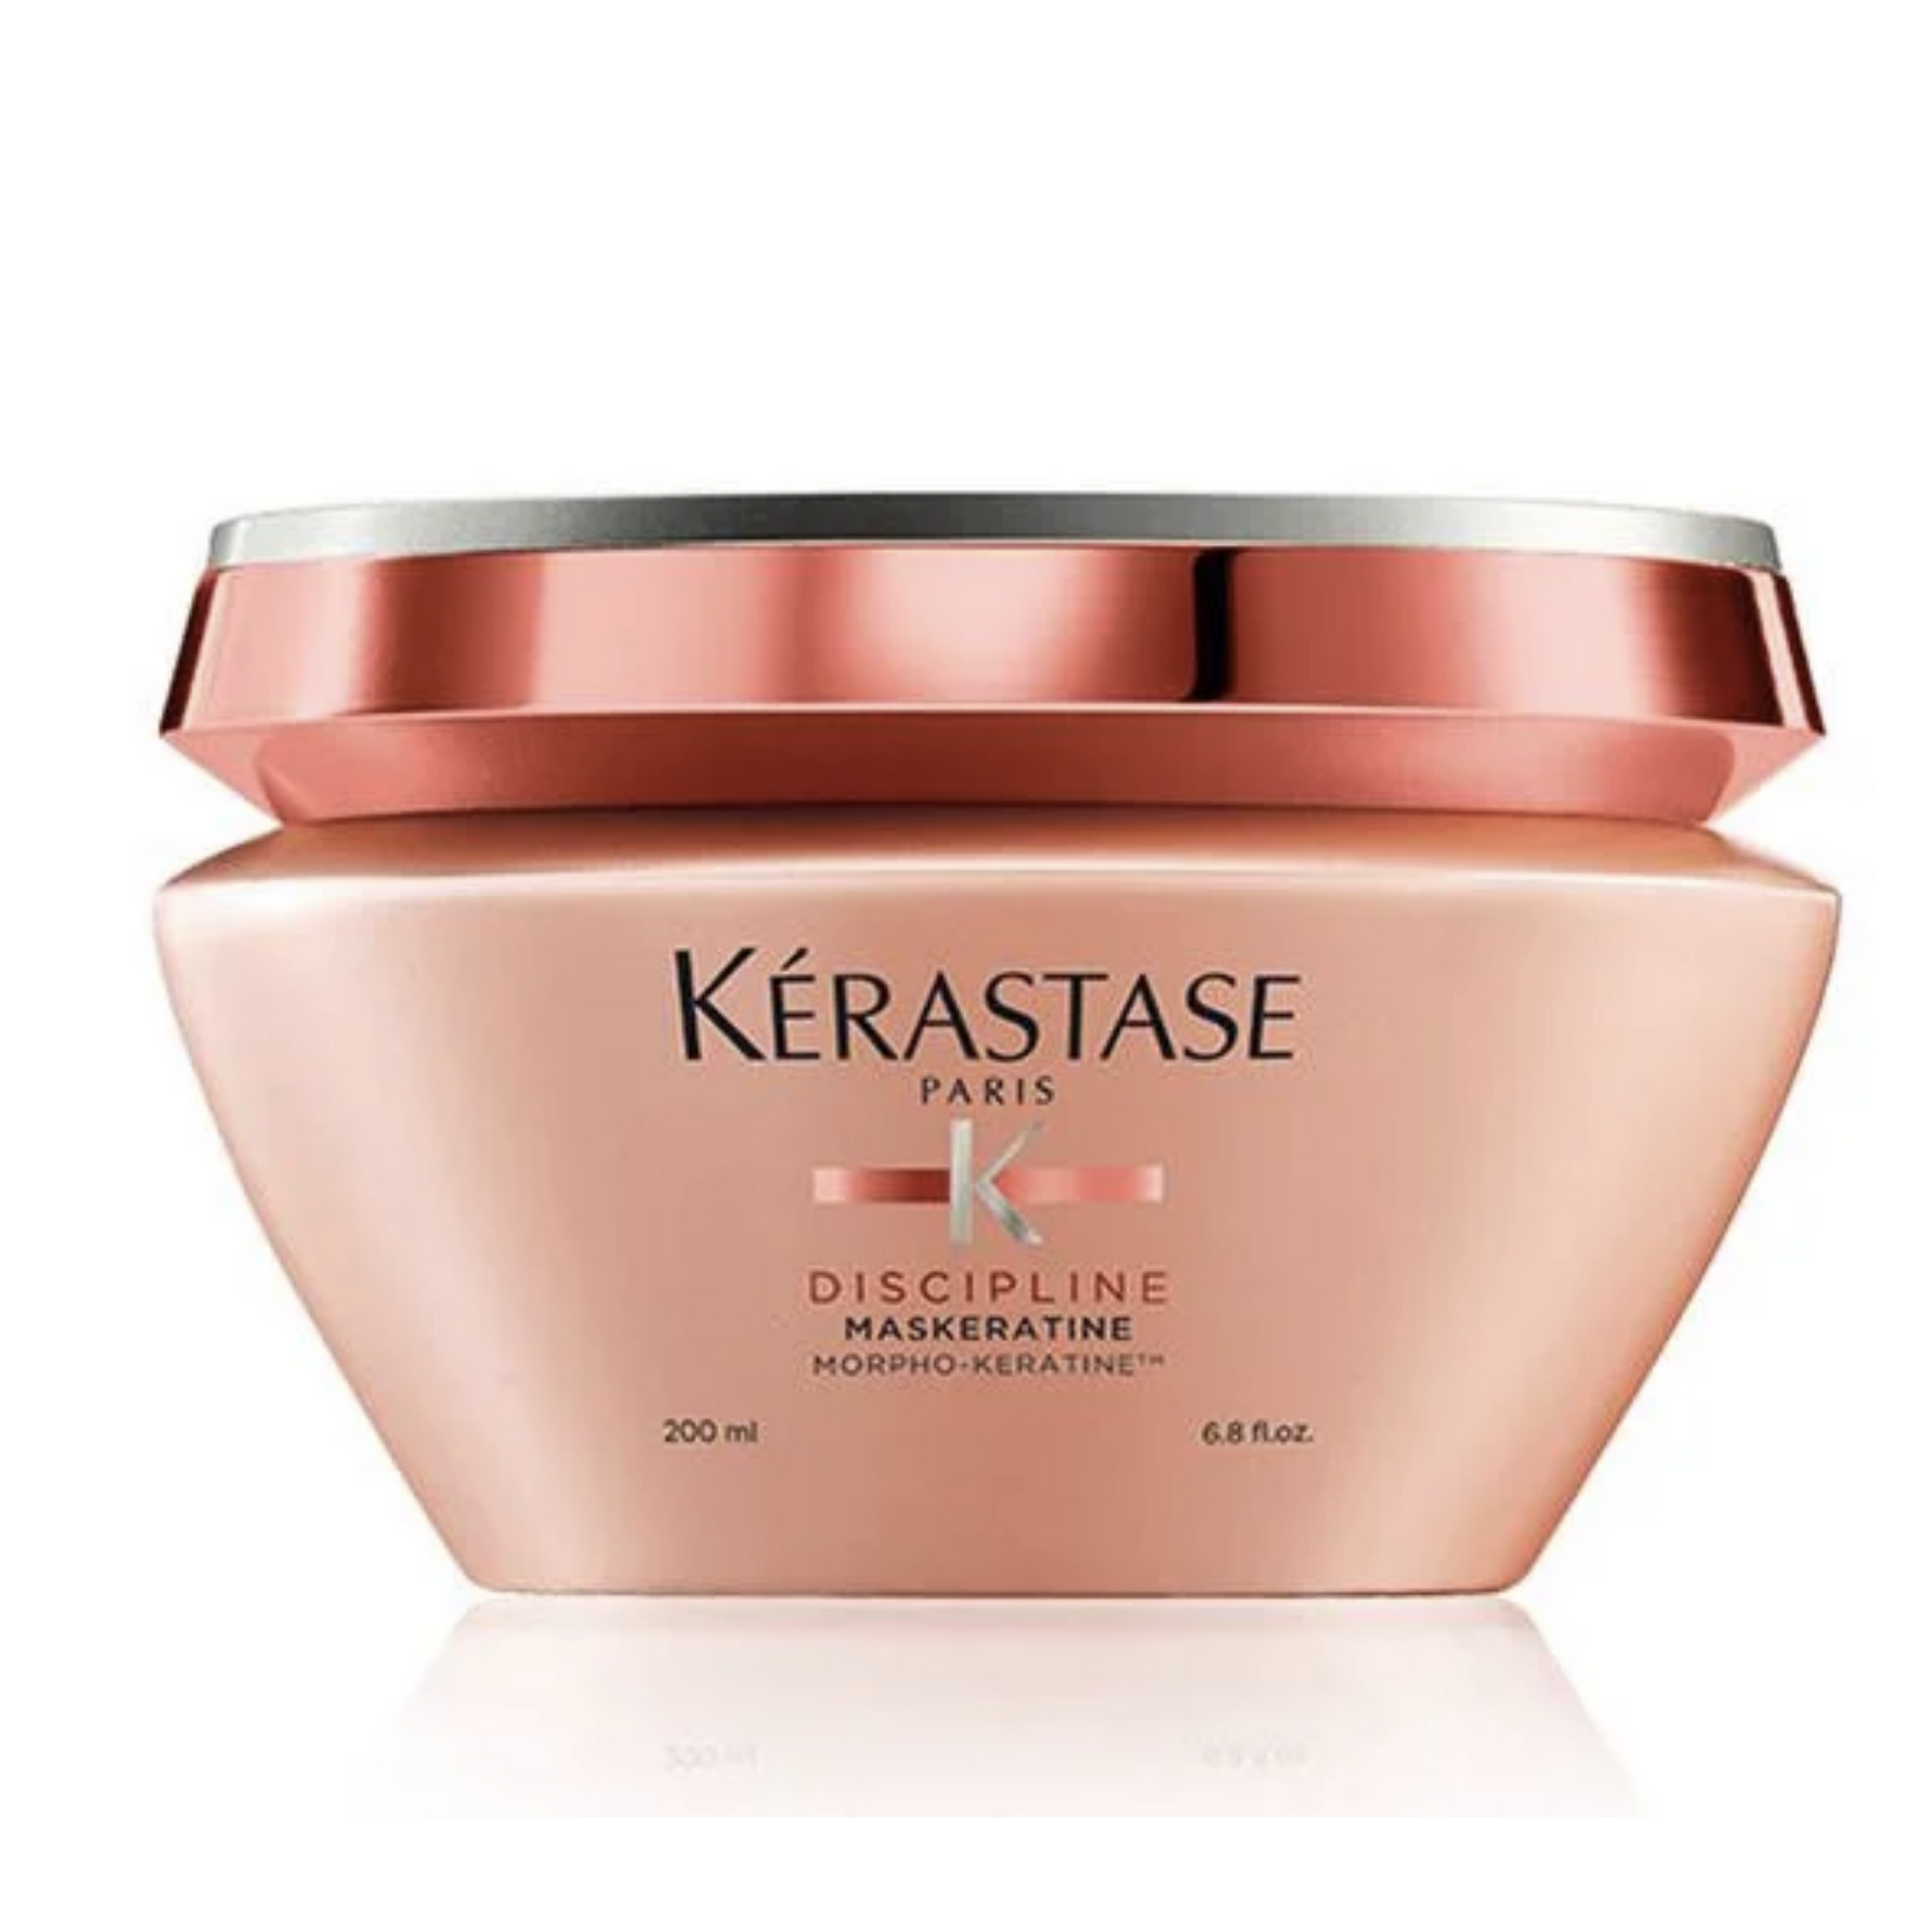 Maskeratine Hair Mask- Smoothing hair mask providing fluidity, movement and softness for frizzy hair.